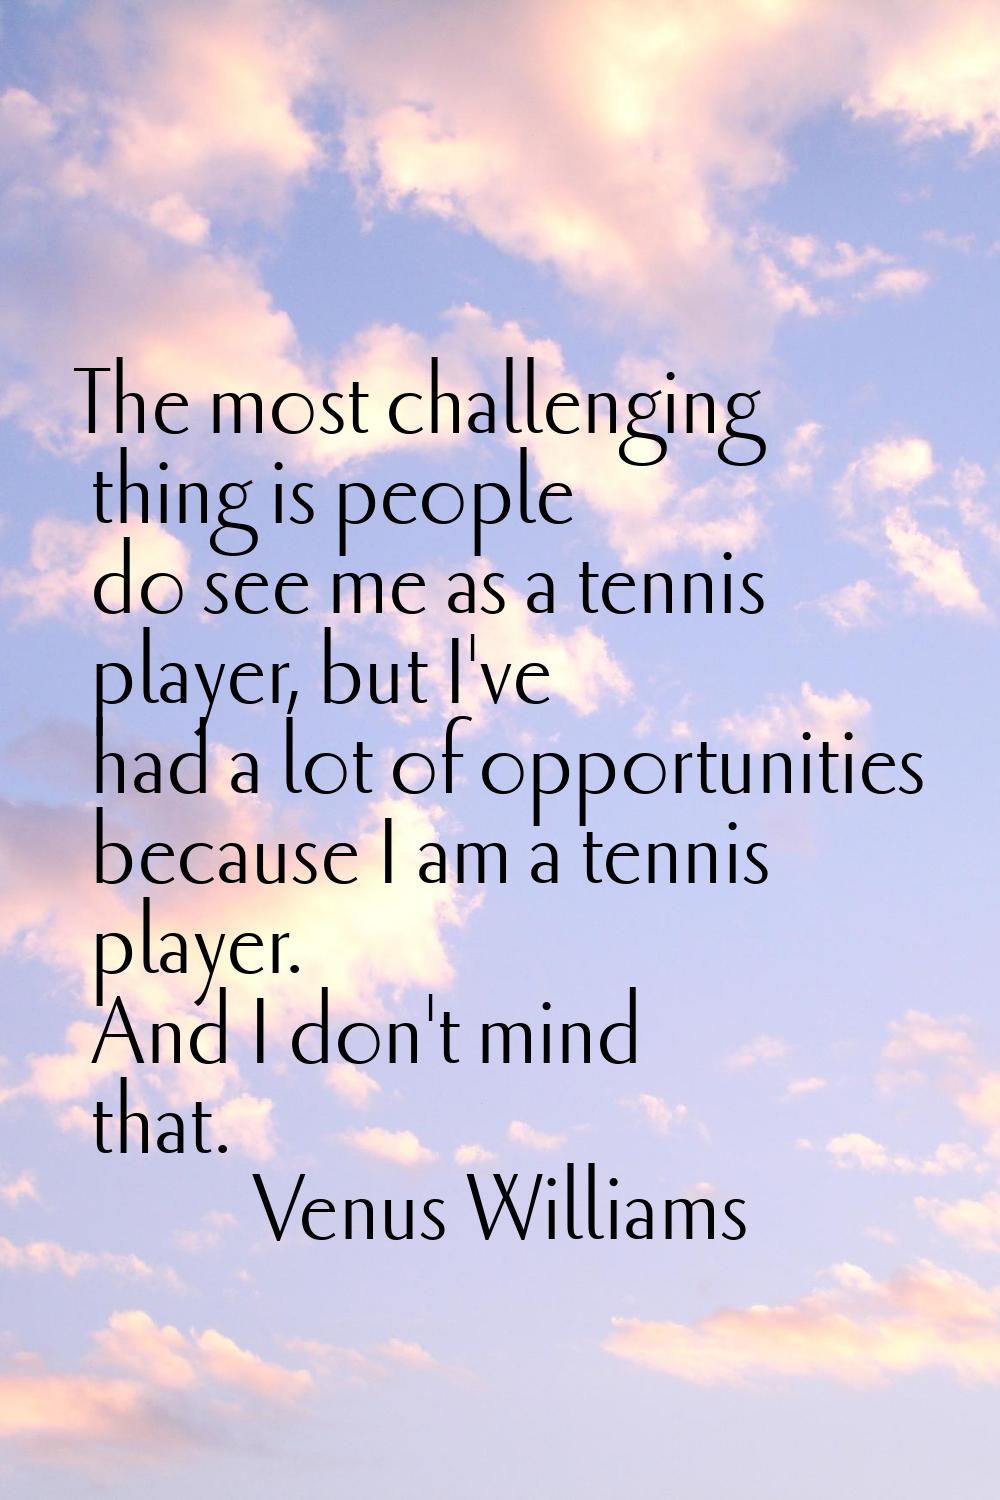 The most challenging thing is people do see me as a tennis player, but I've had a lot of opportunit